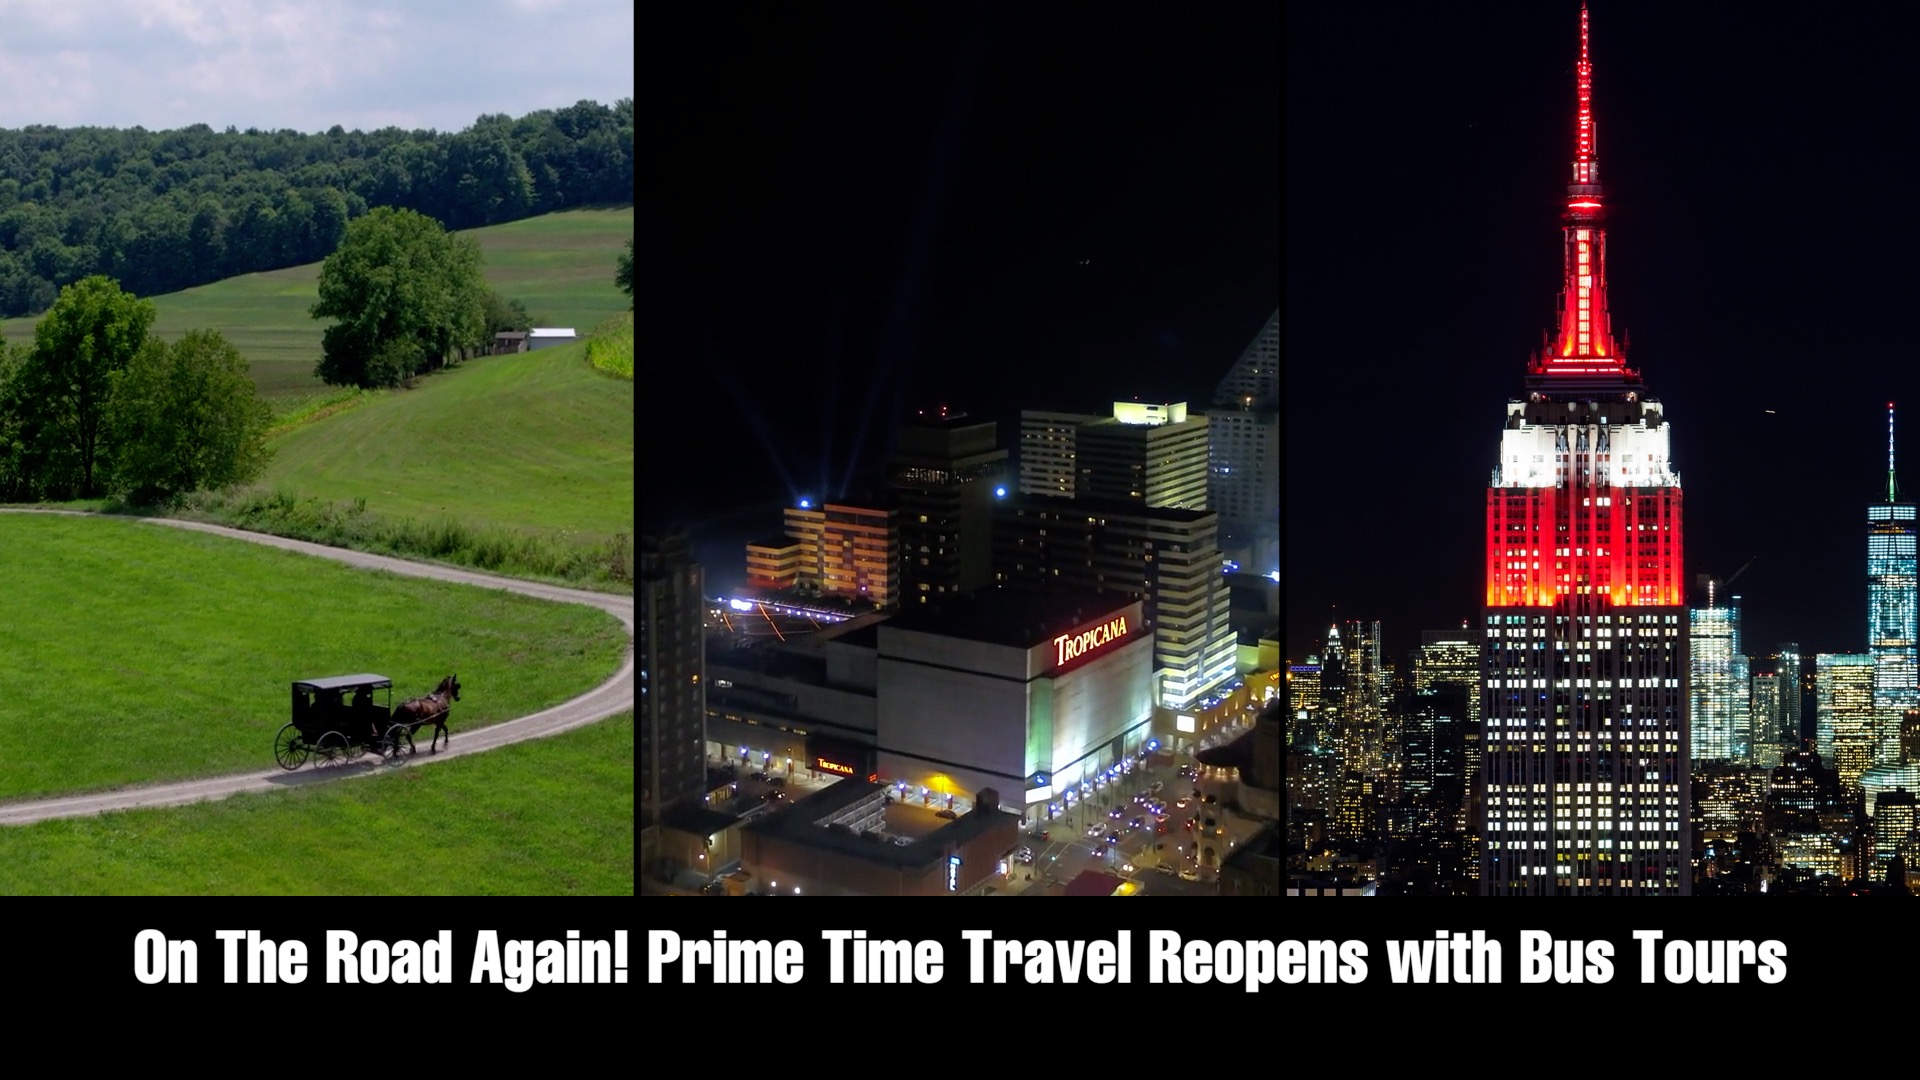 On The Road Again! Prime Time Travel Reopens with Bus Tours